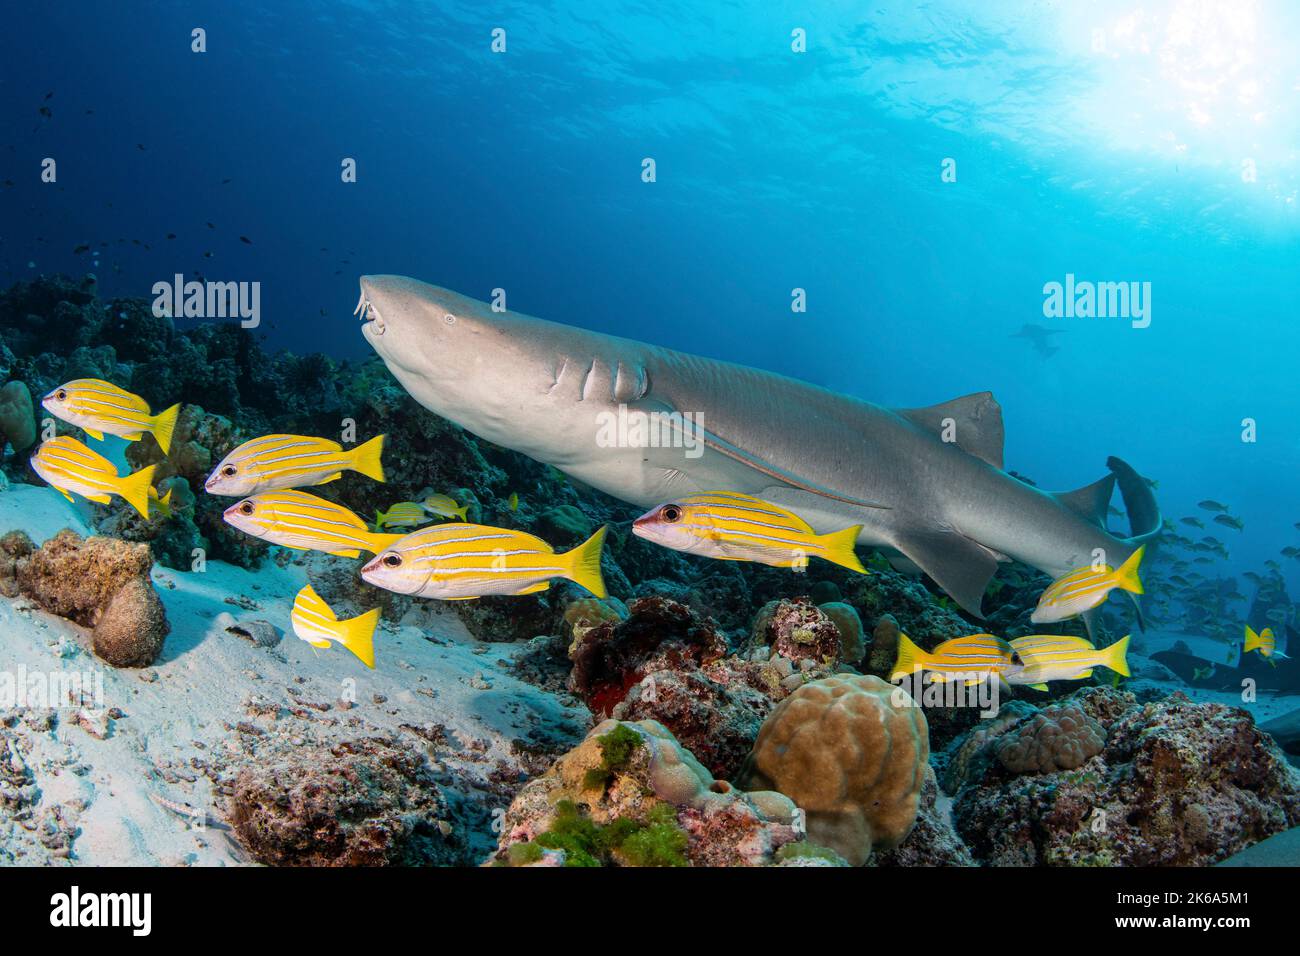 A nurse shark swims along a reef with a school of yellow snapper, Maldives. Stock Photo